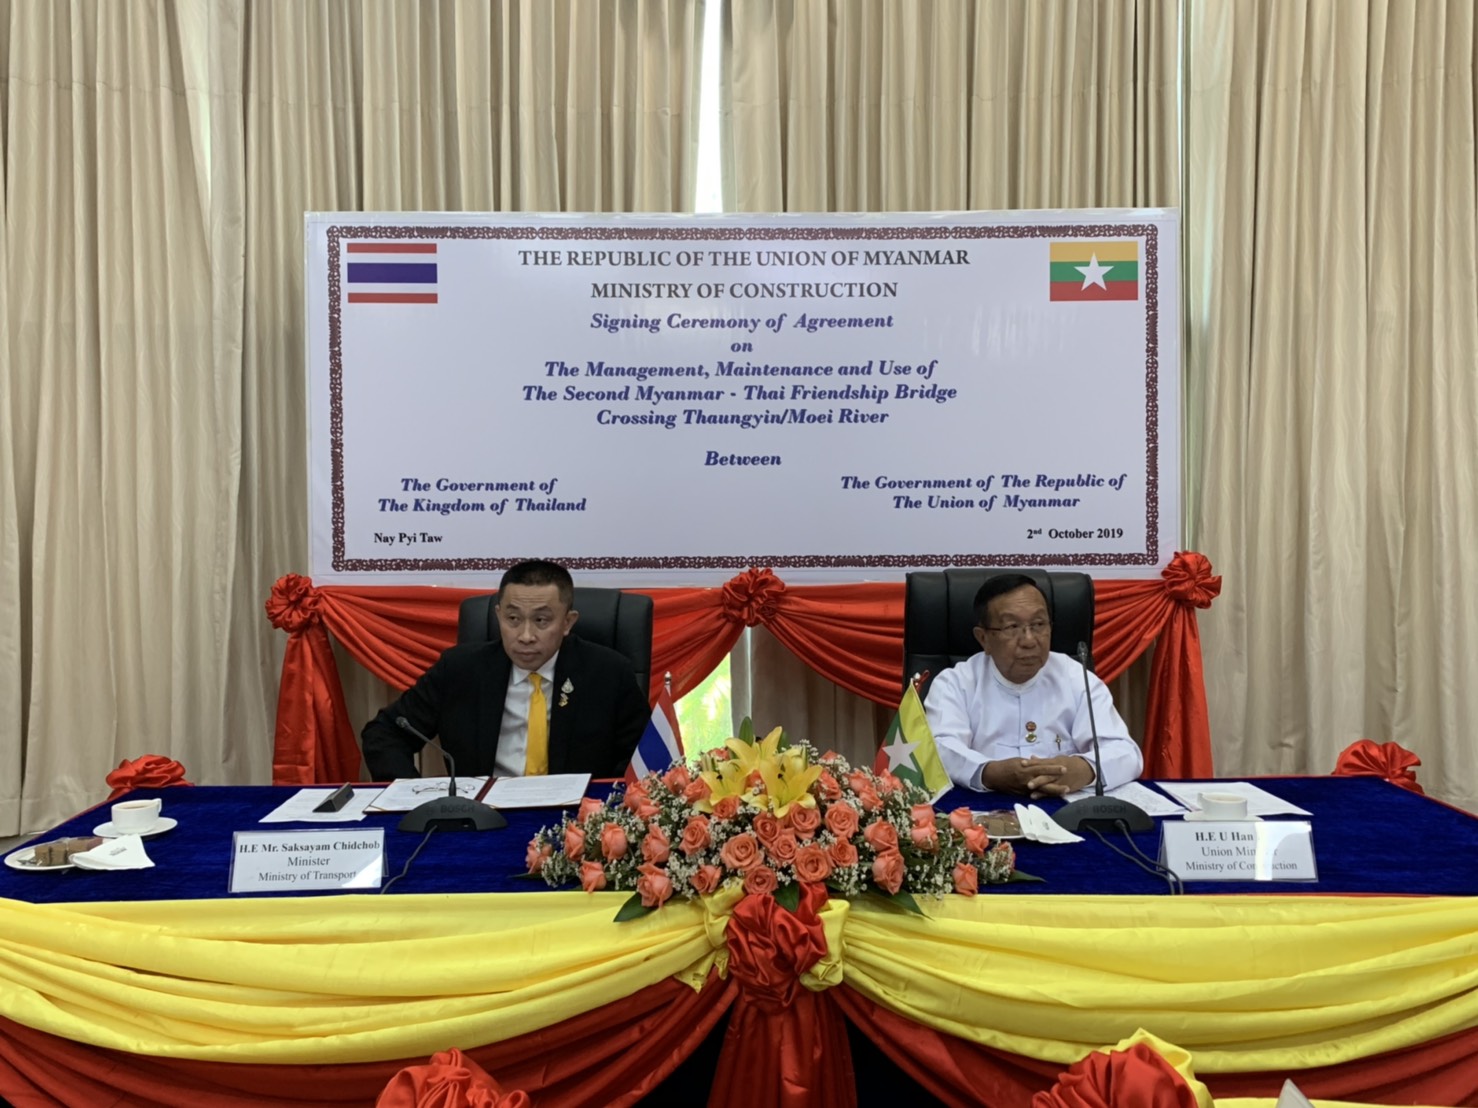 Minister of Transport of Thailand signed the MoU on The Management, Maintenance and Use of the Second Myanmar - Thai Friendship Bridge Crossing Thaungyin/Moei River